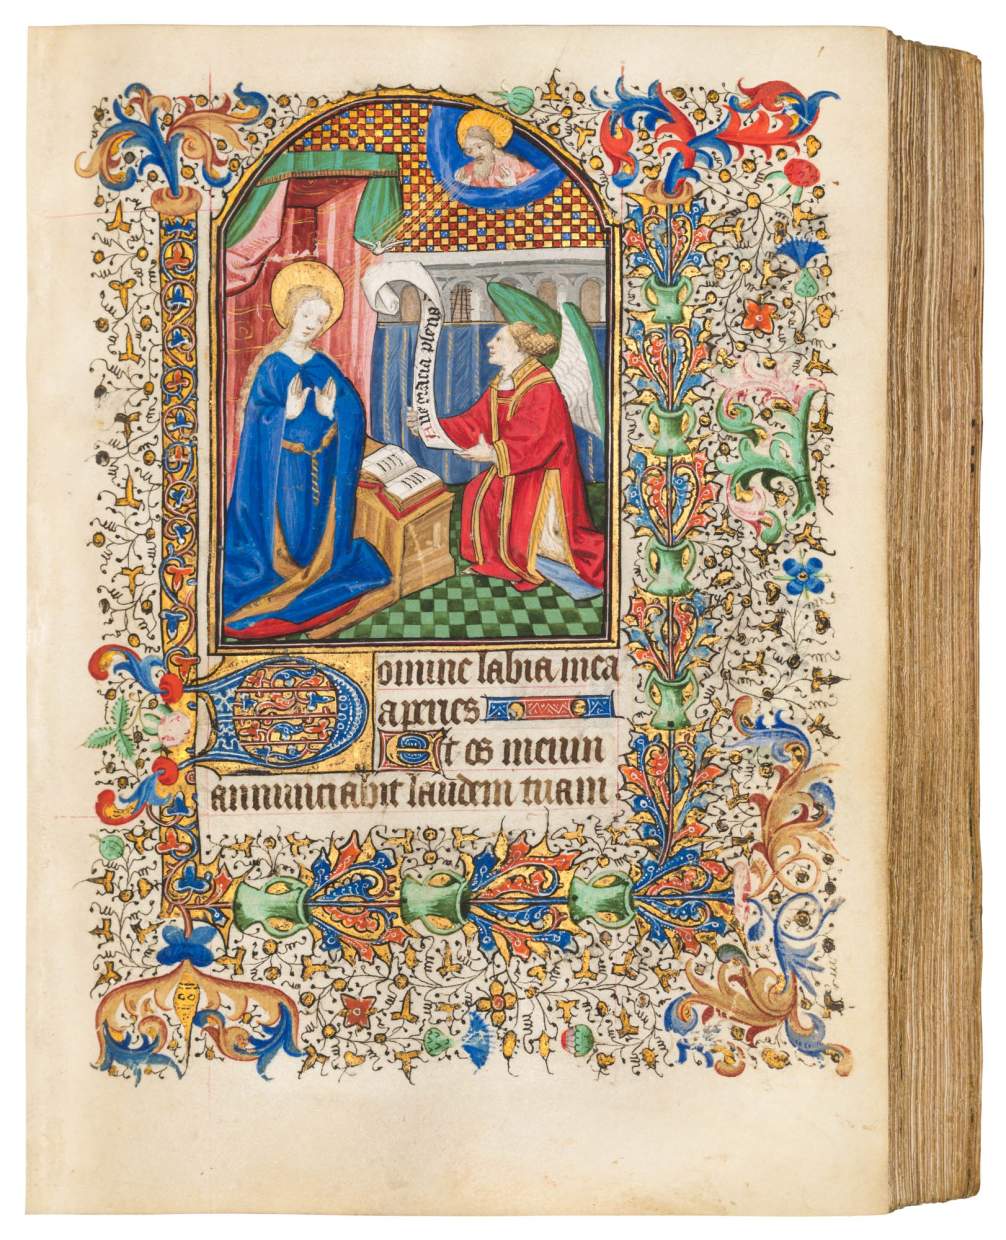 Tantalising Book of Hours from the Eminent Dunois Master